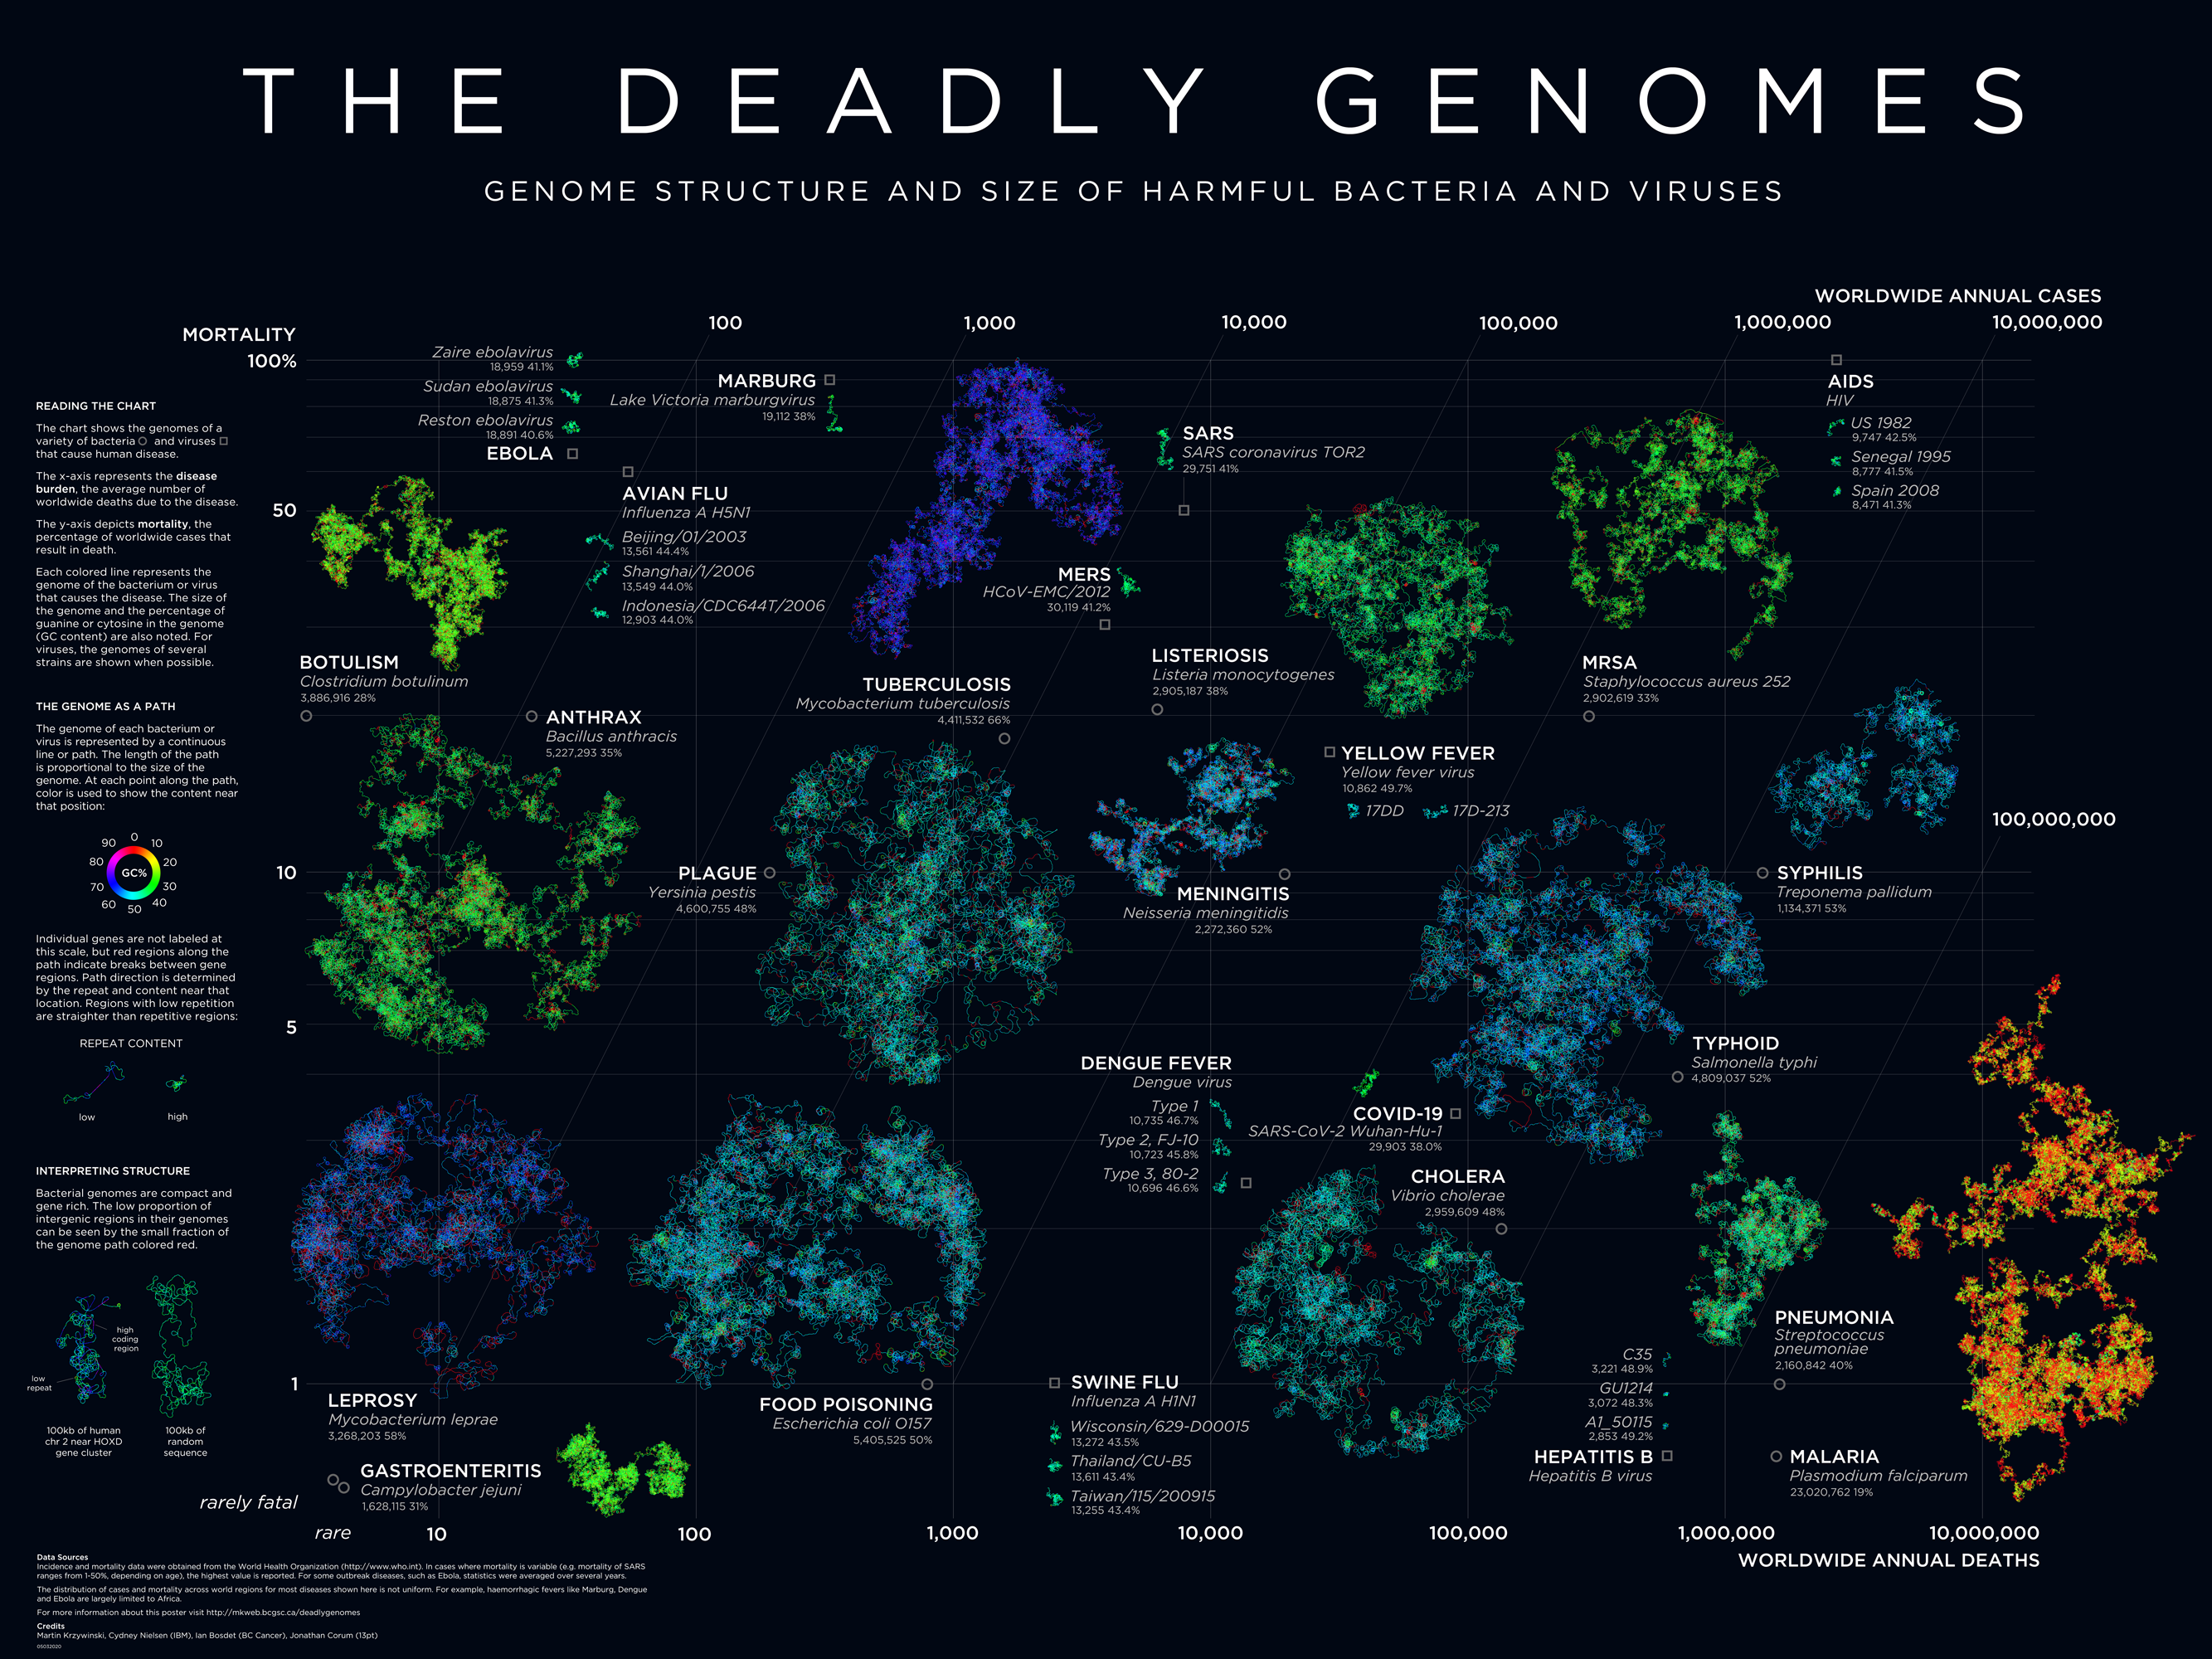 Deadly Genomes - Genome size and structure of harmful bacteria and viruses / Science and Art by Martin Krzywinski